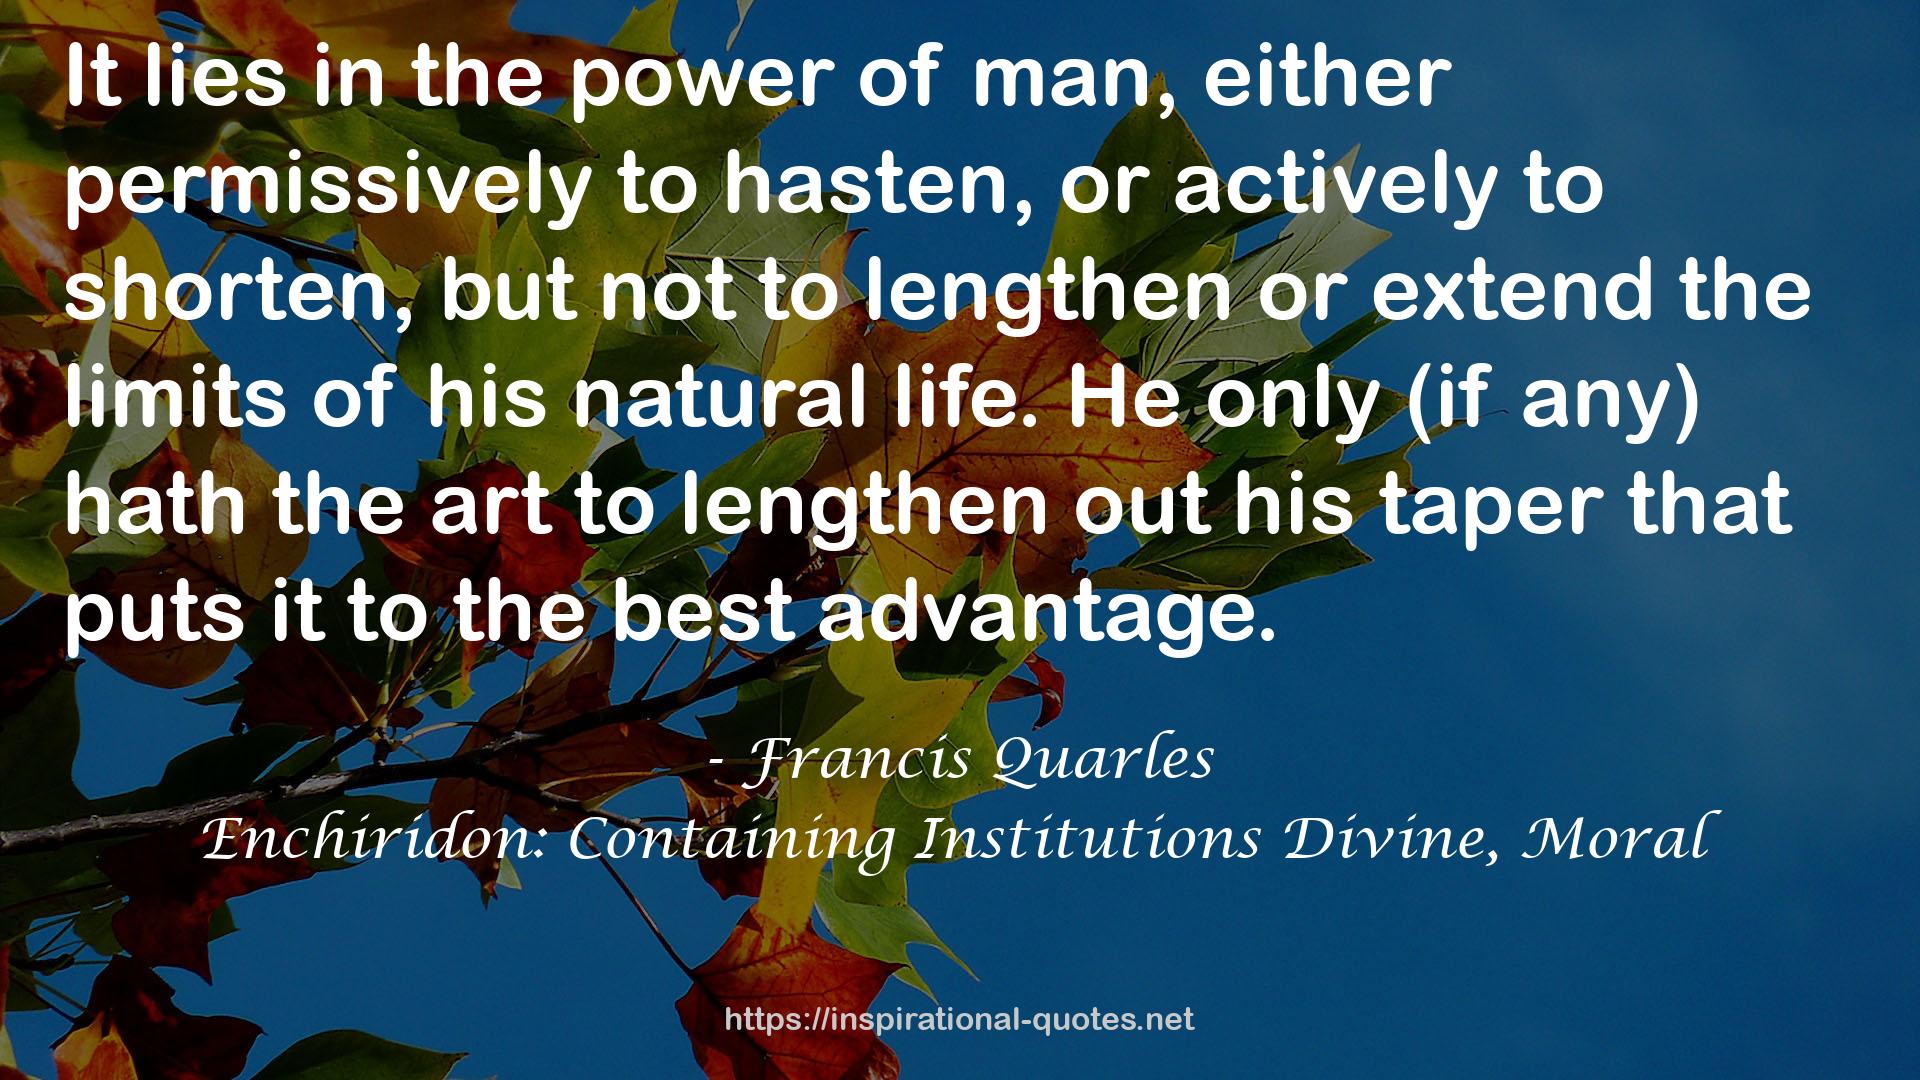 Enchiridon: Containing Institutions Divine, Moral QUOTES